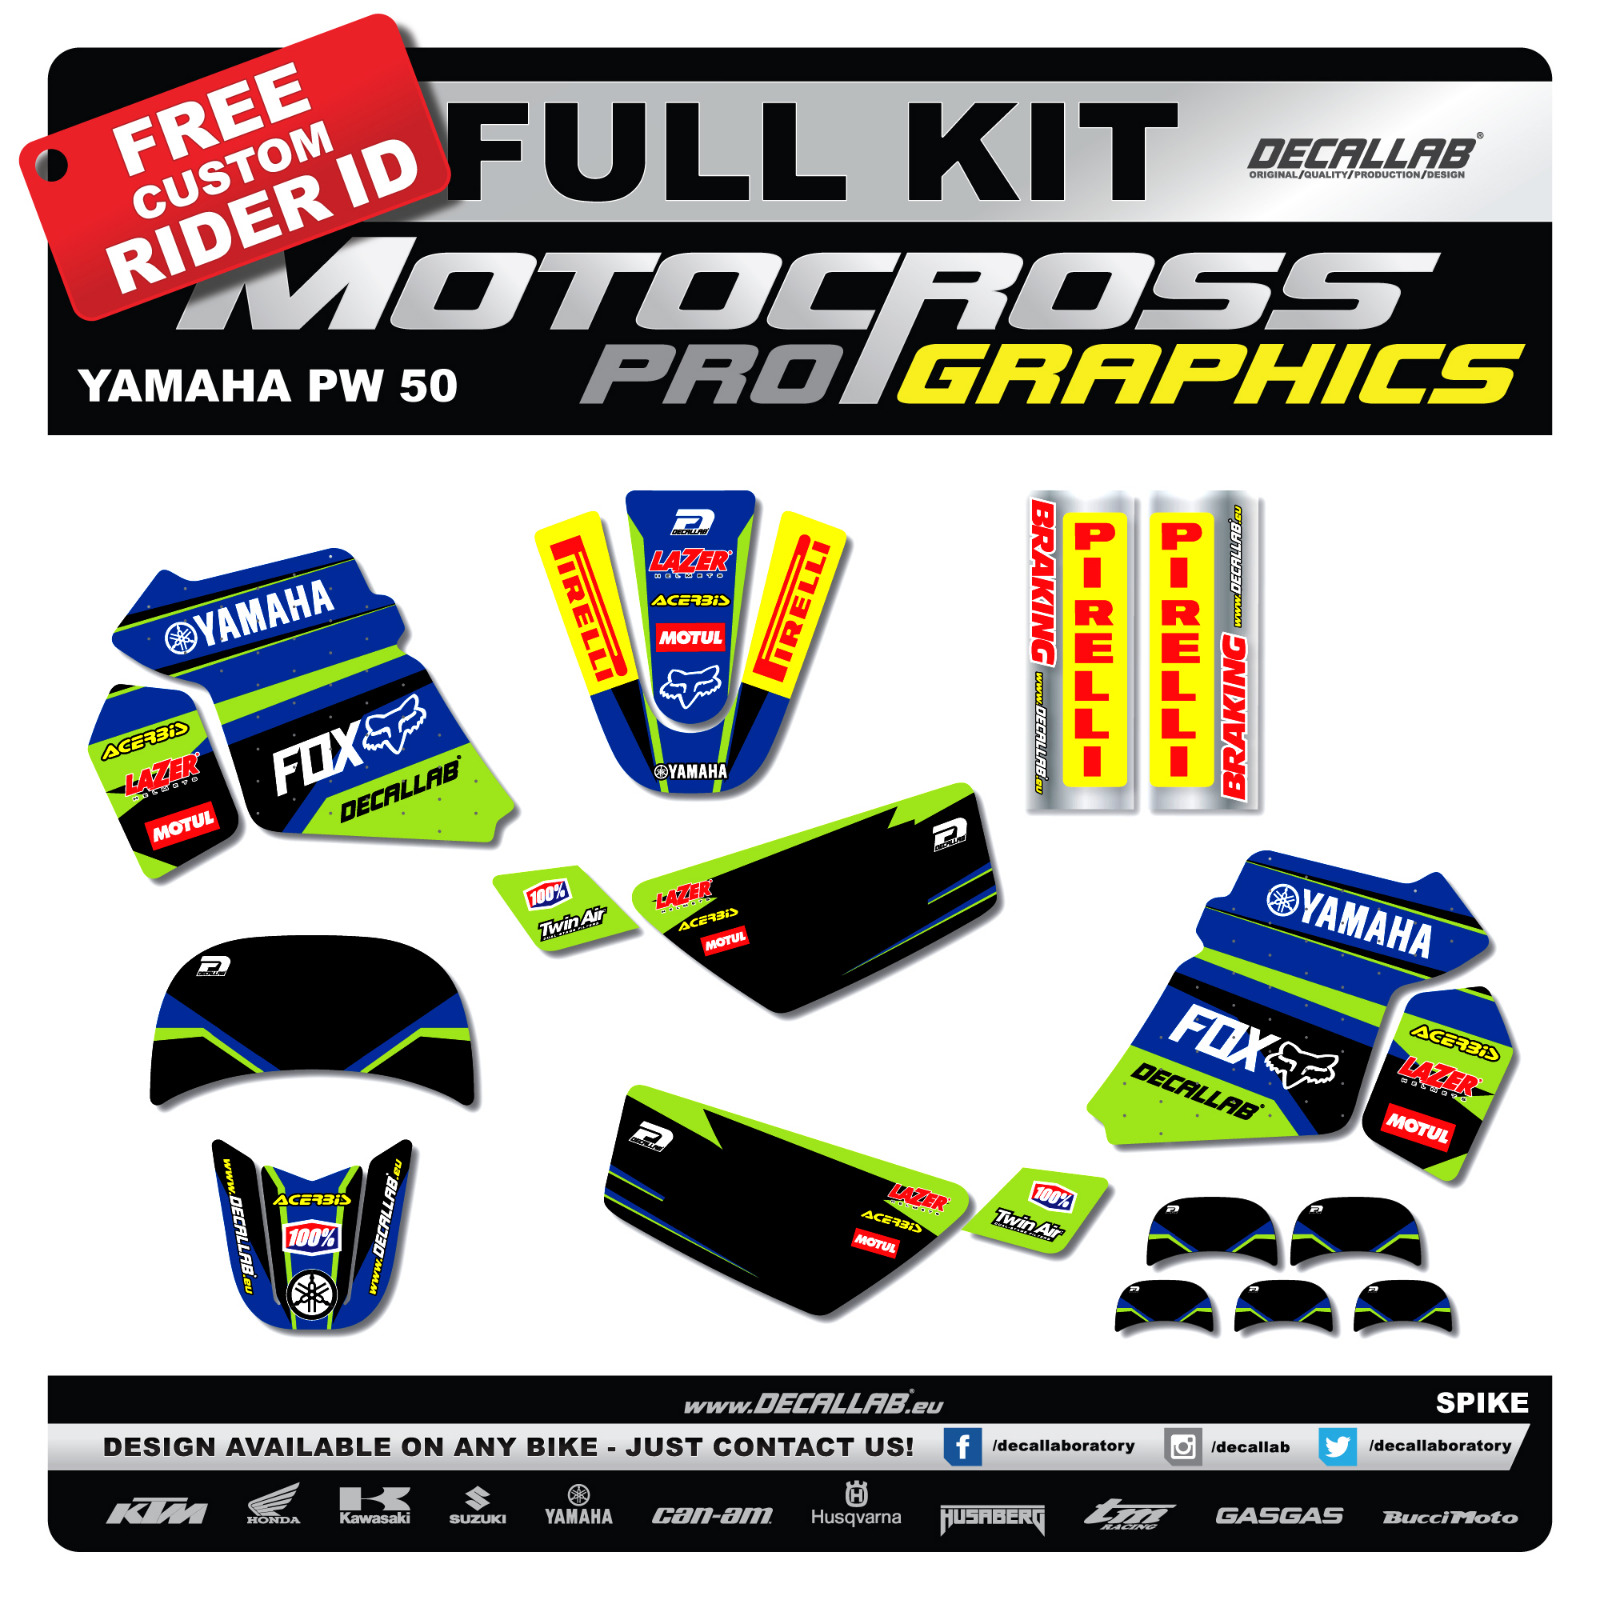 YAMAHA PW 50 Graphics Decals Stickers Decallab